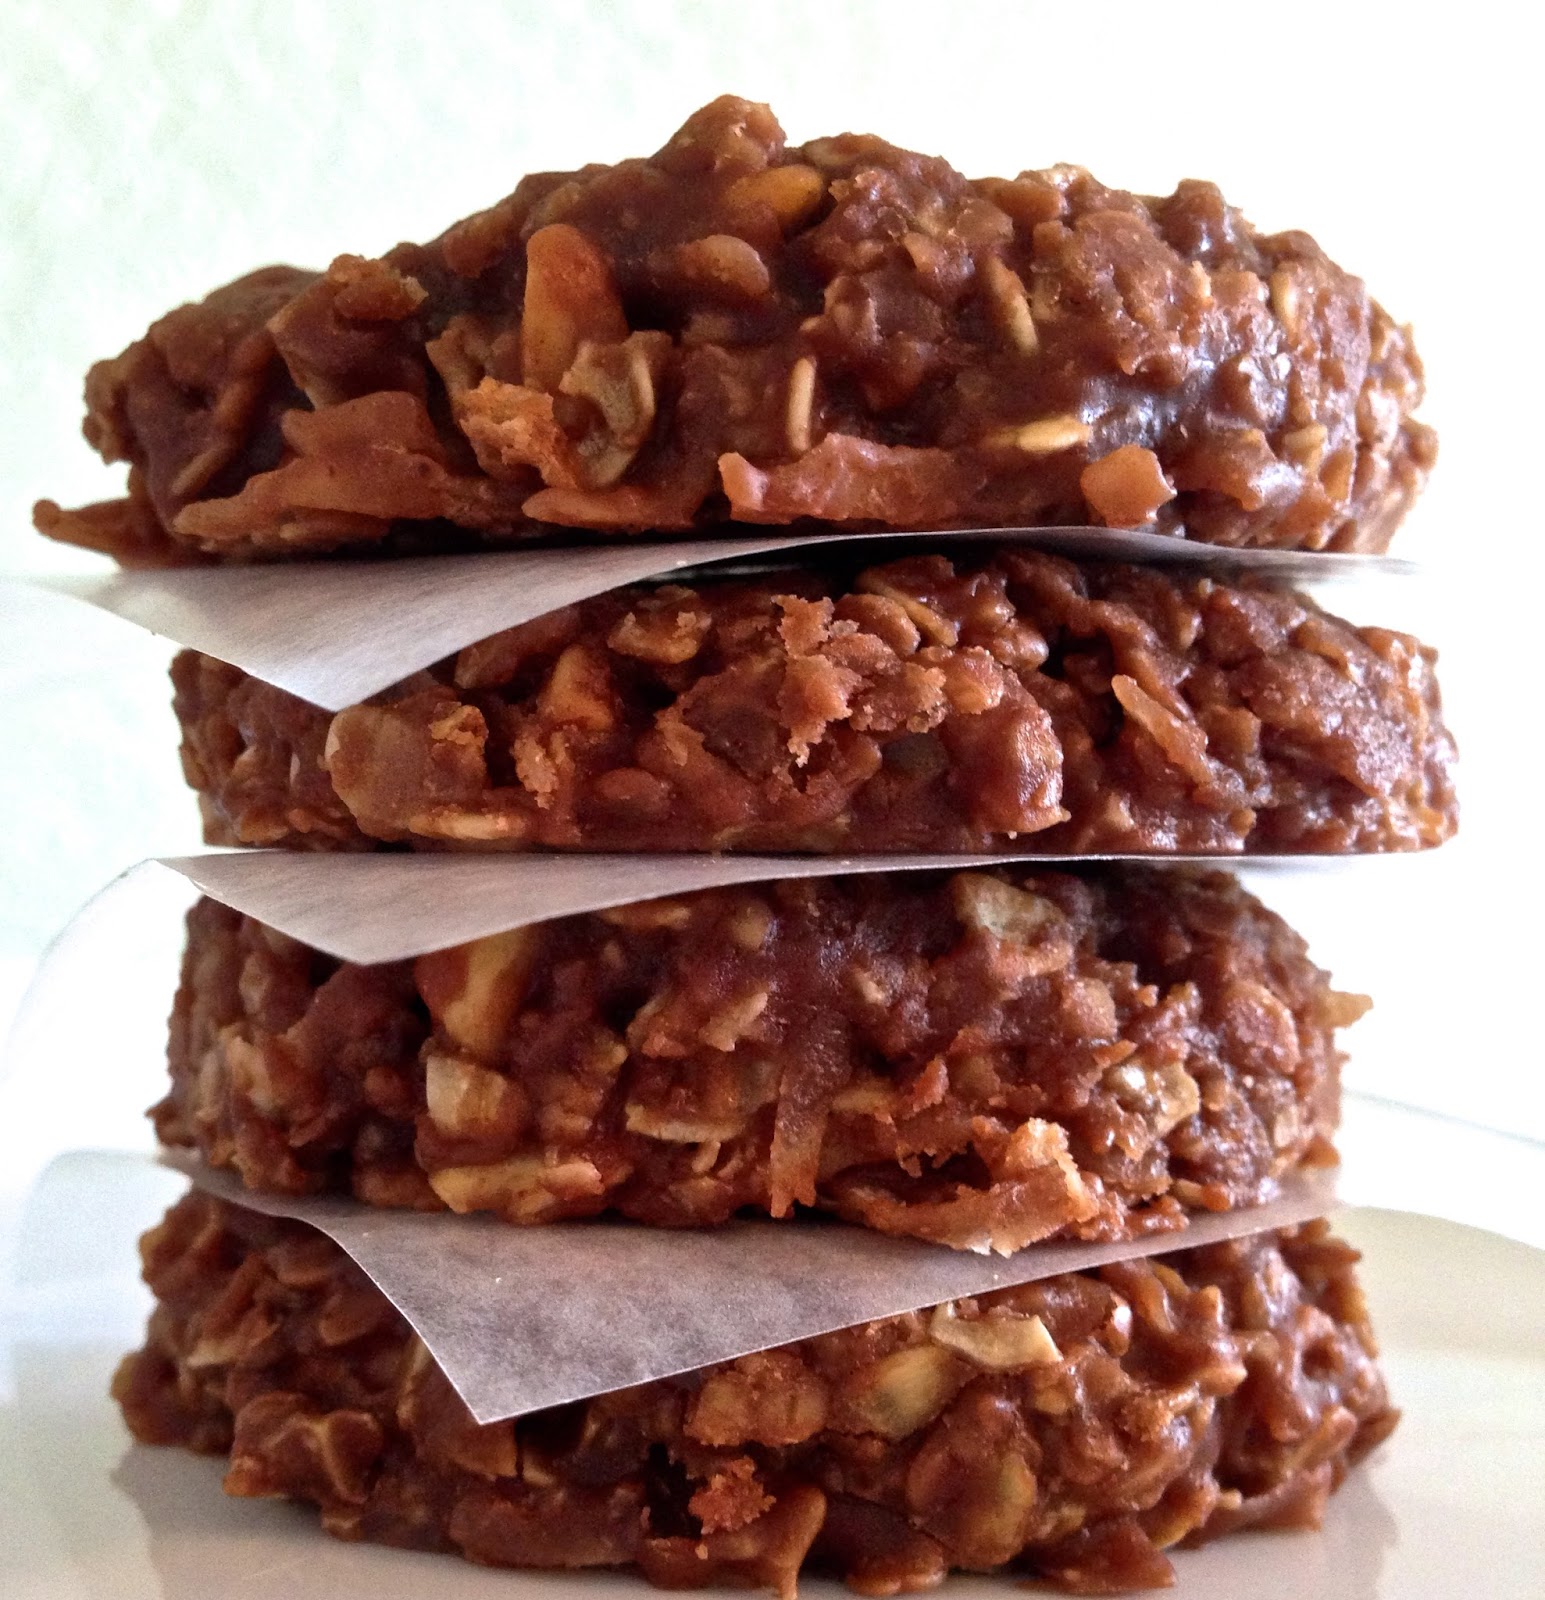 Mary's Busy Kitchen: GF Chocolate Oatmeal Coconut No Bake Cookies